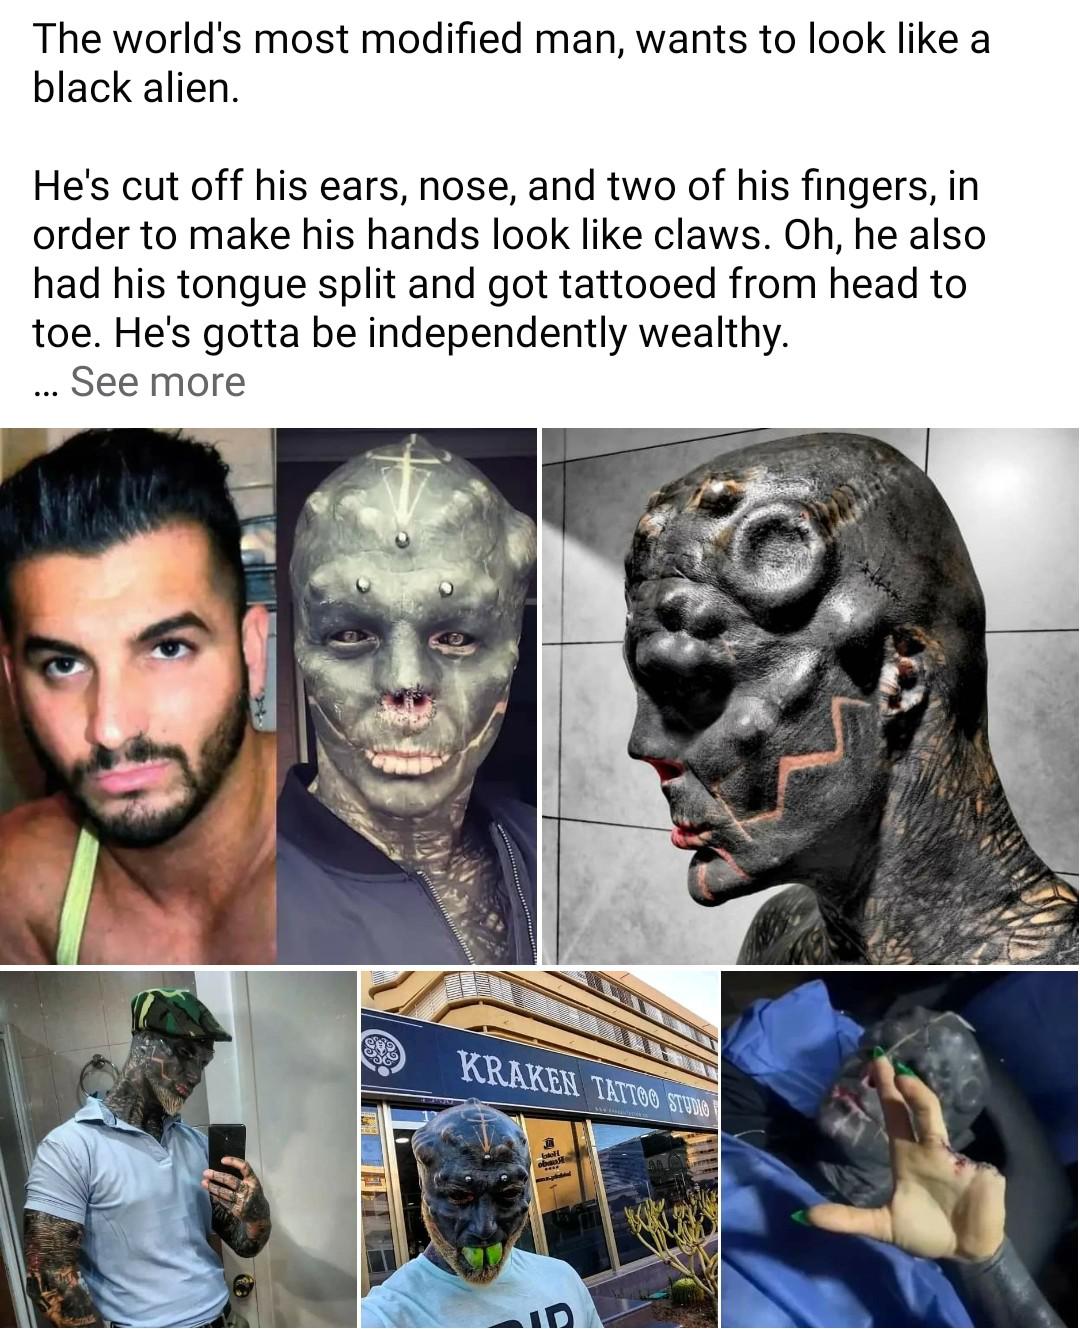 cringe - cringetopia - create - The world's most modified man, wants to look a black alien. He's cut off his ears, nose, and two of his fingers, in order to make his hands look claws. Oh, he also had his tongue split and got tattooed from head to toe. He'